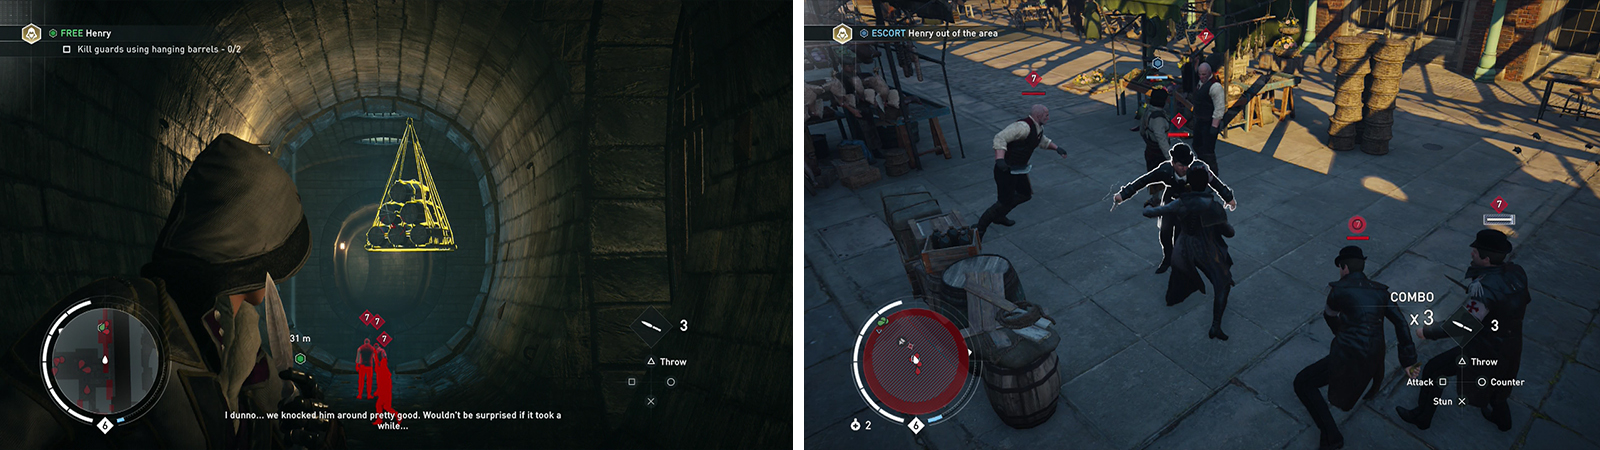 Use the hanging barrels to kill enemies for the optional objective (left). Escort the prisoner through the marketplace (right).